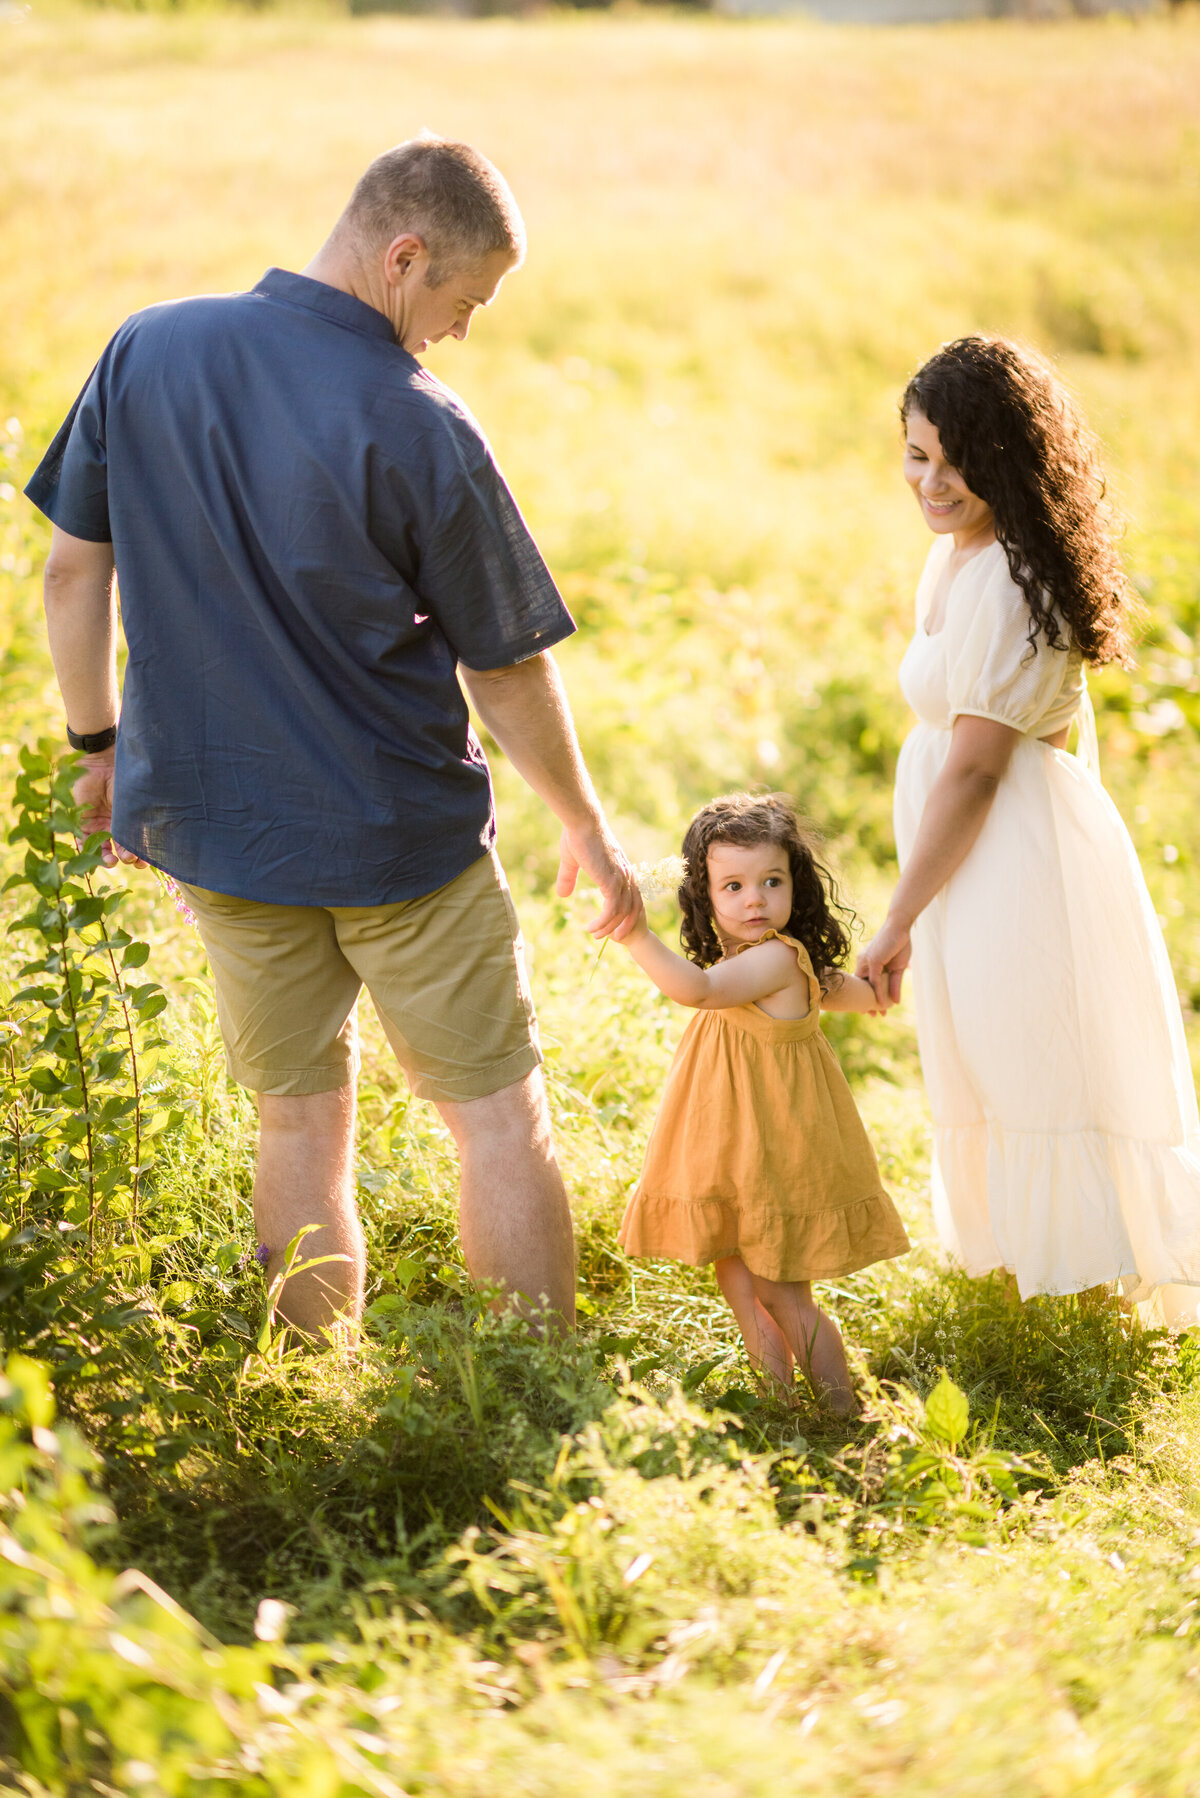 Boston-family-photographer-bella-wang-photography-Lifestyle-session-outdoor-wildflower-26